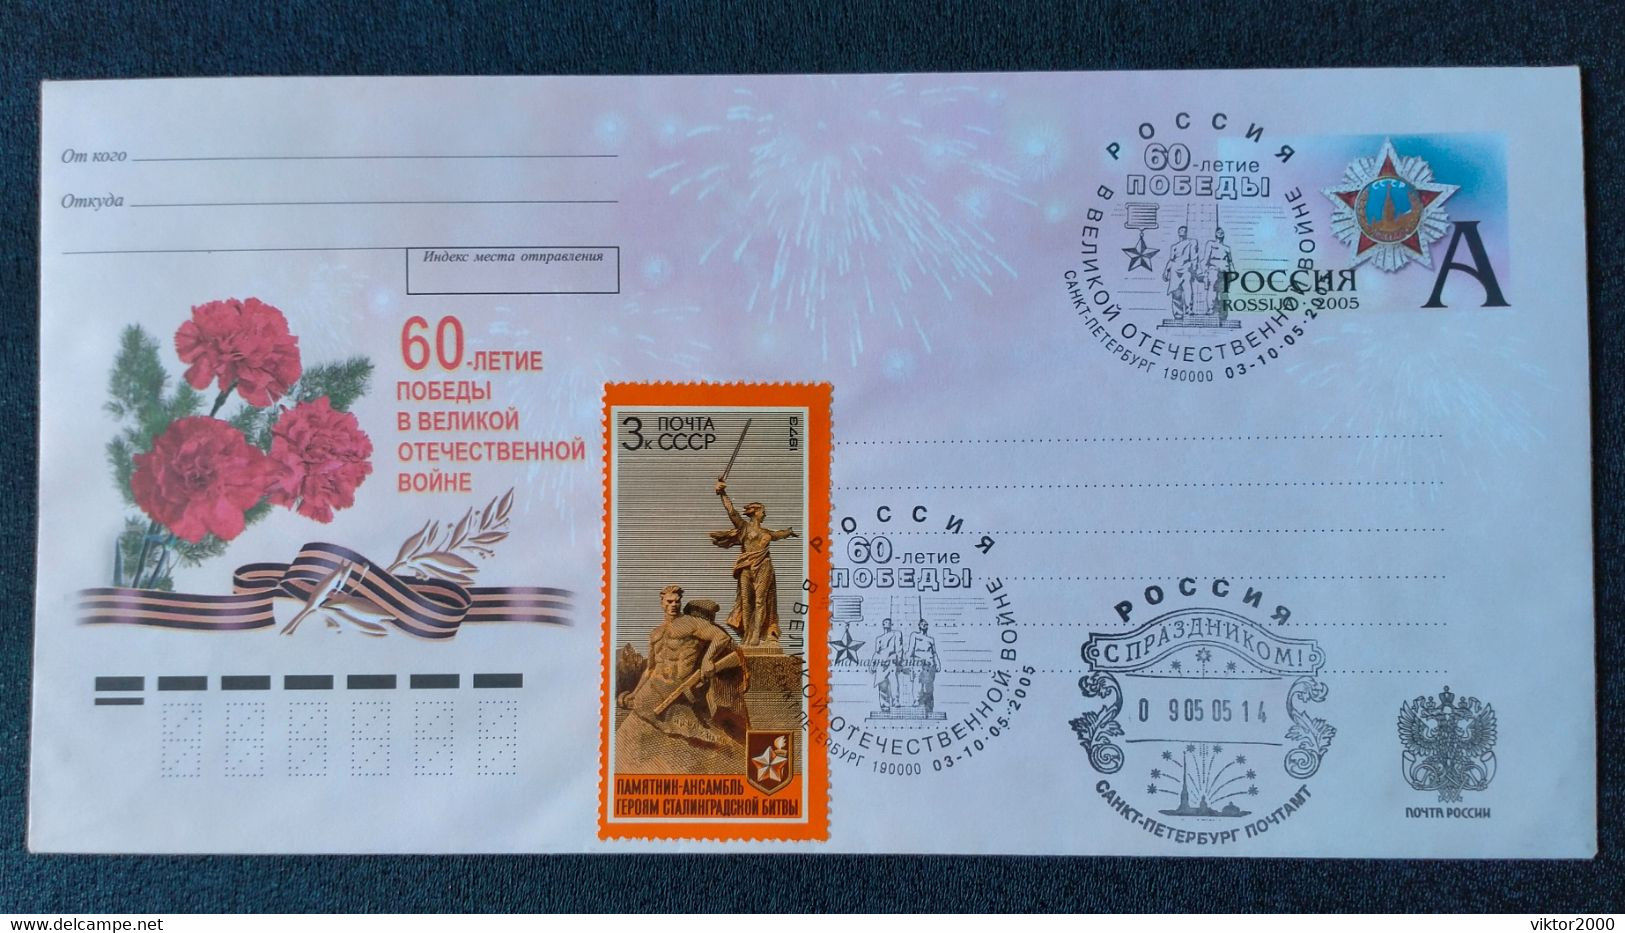 RUSSIA FDC 2005 .1973 -60 Years Of Victory In The Great Patriotic War. Print Saint Petersburg . THE BATTLE OF STALINGRAD - FDC